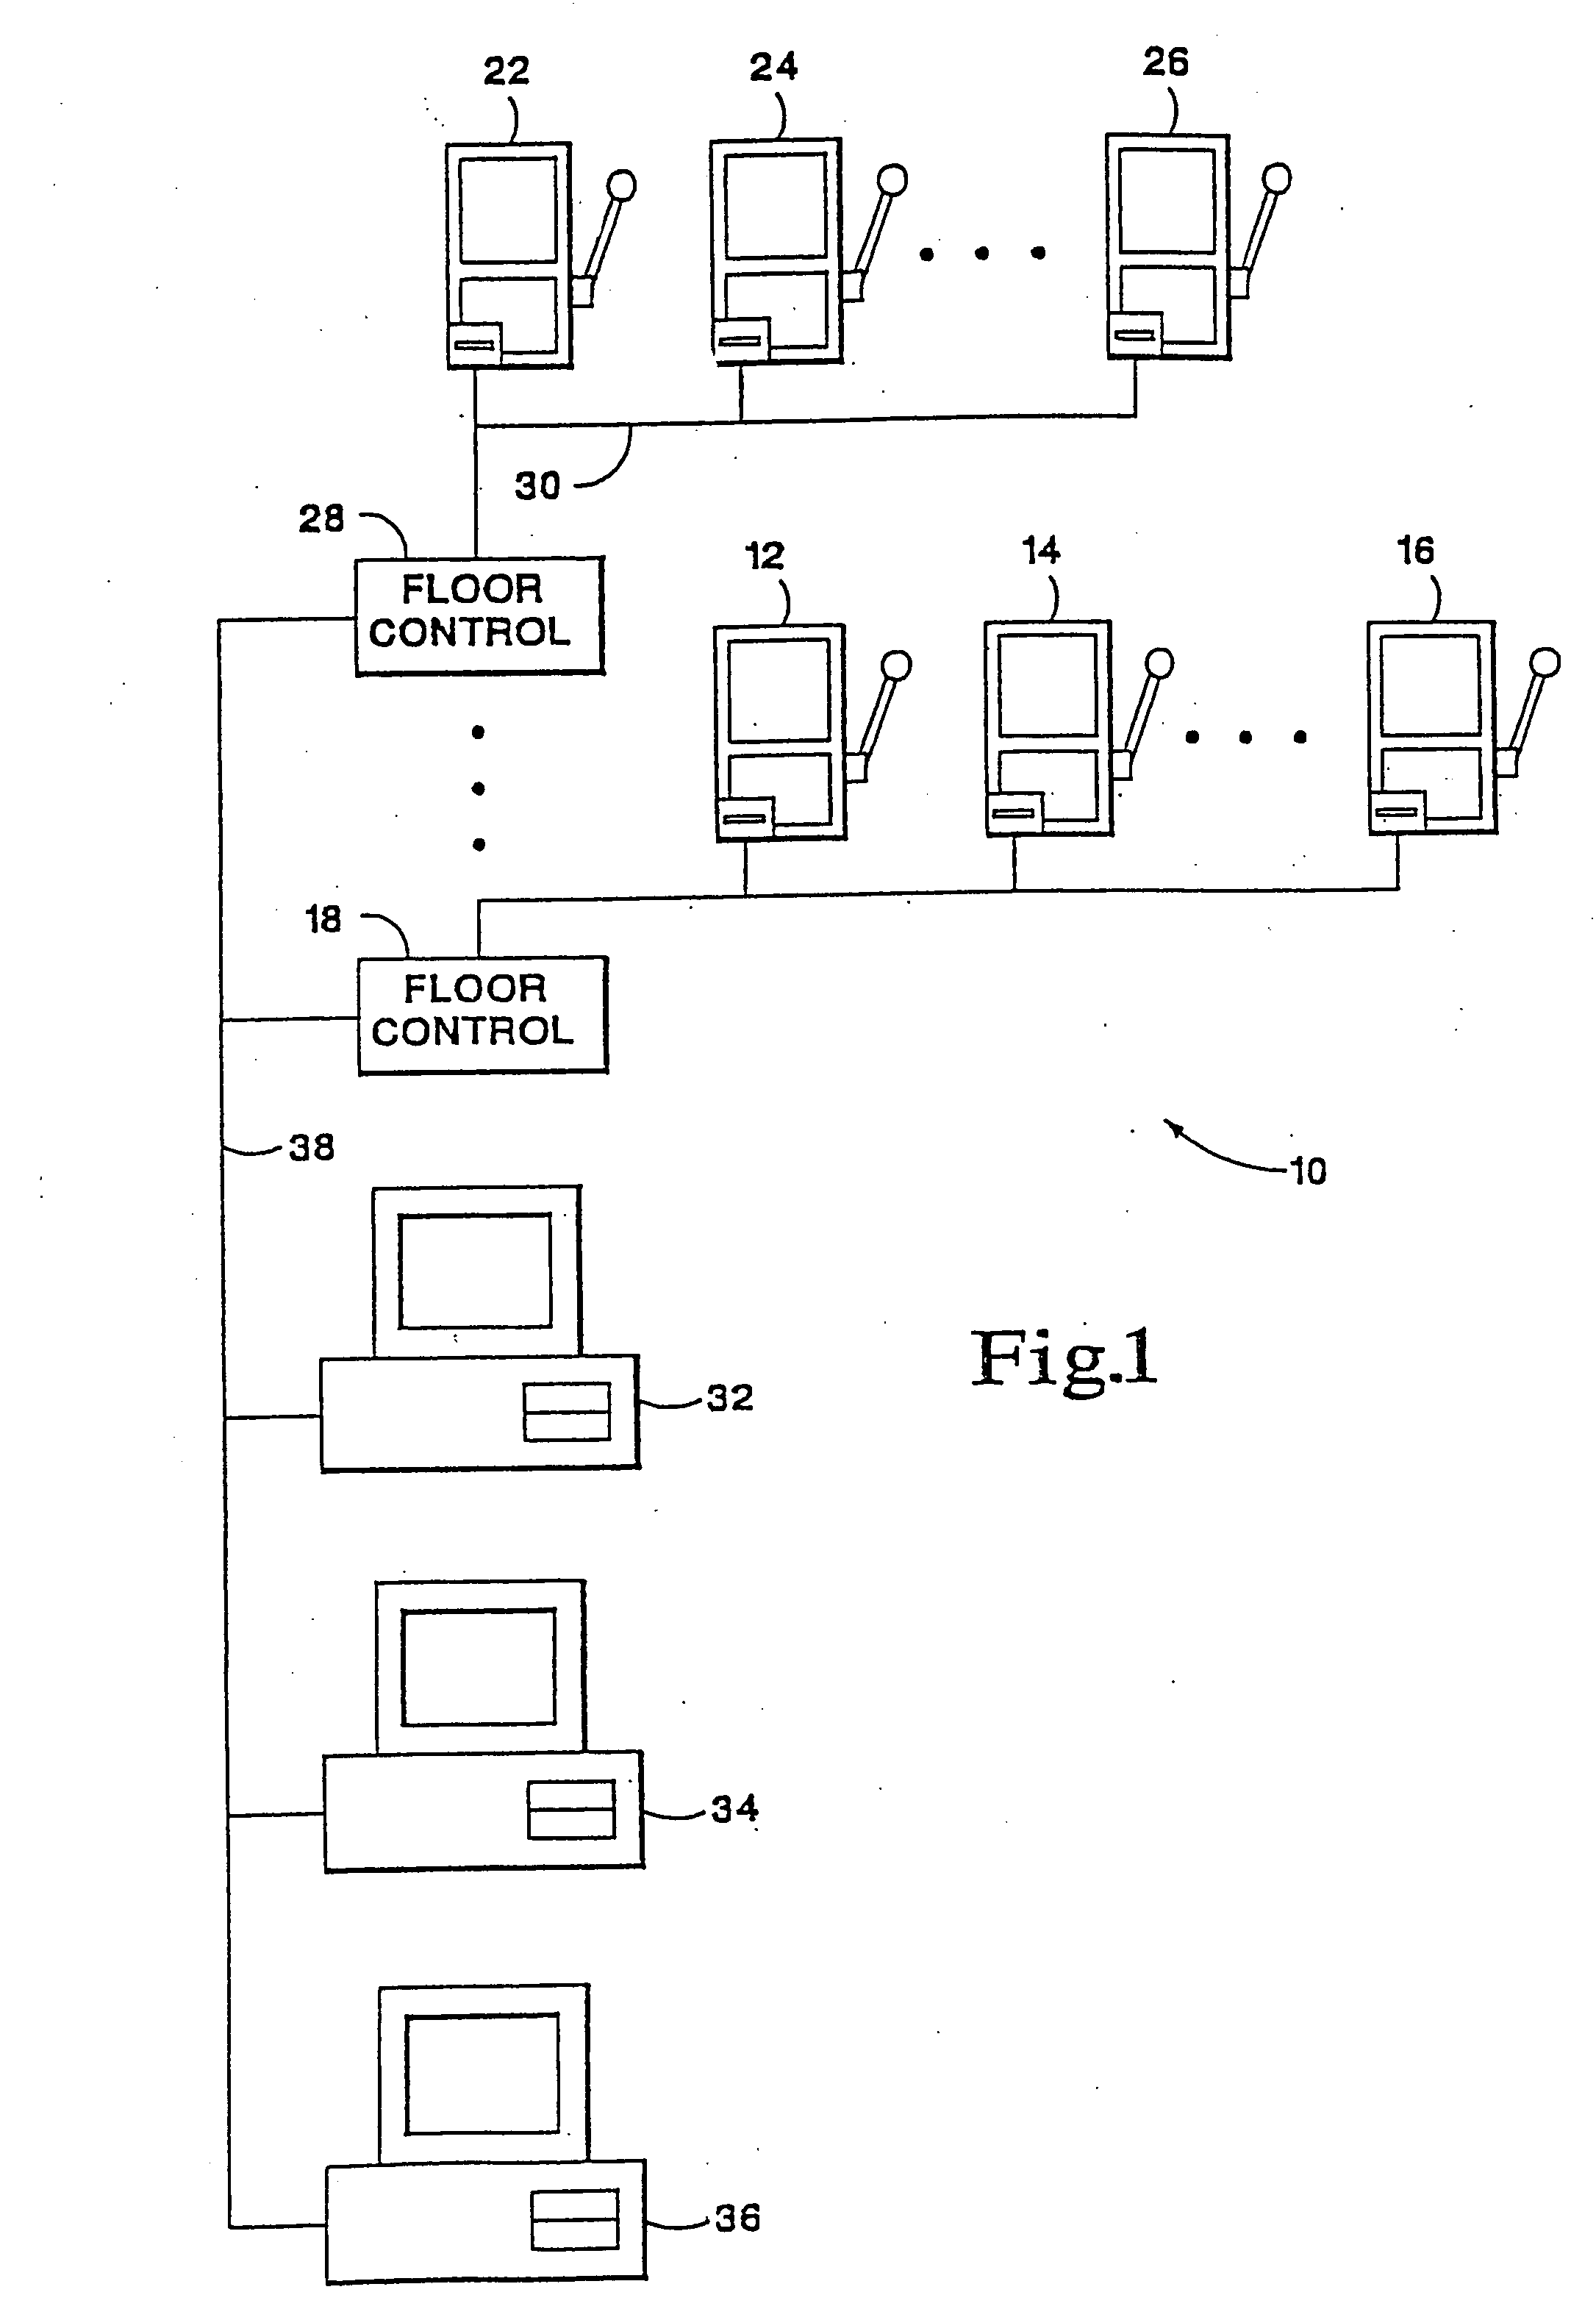 Method for providing incentive to play gaming devices connected by a network to a host computer